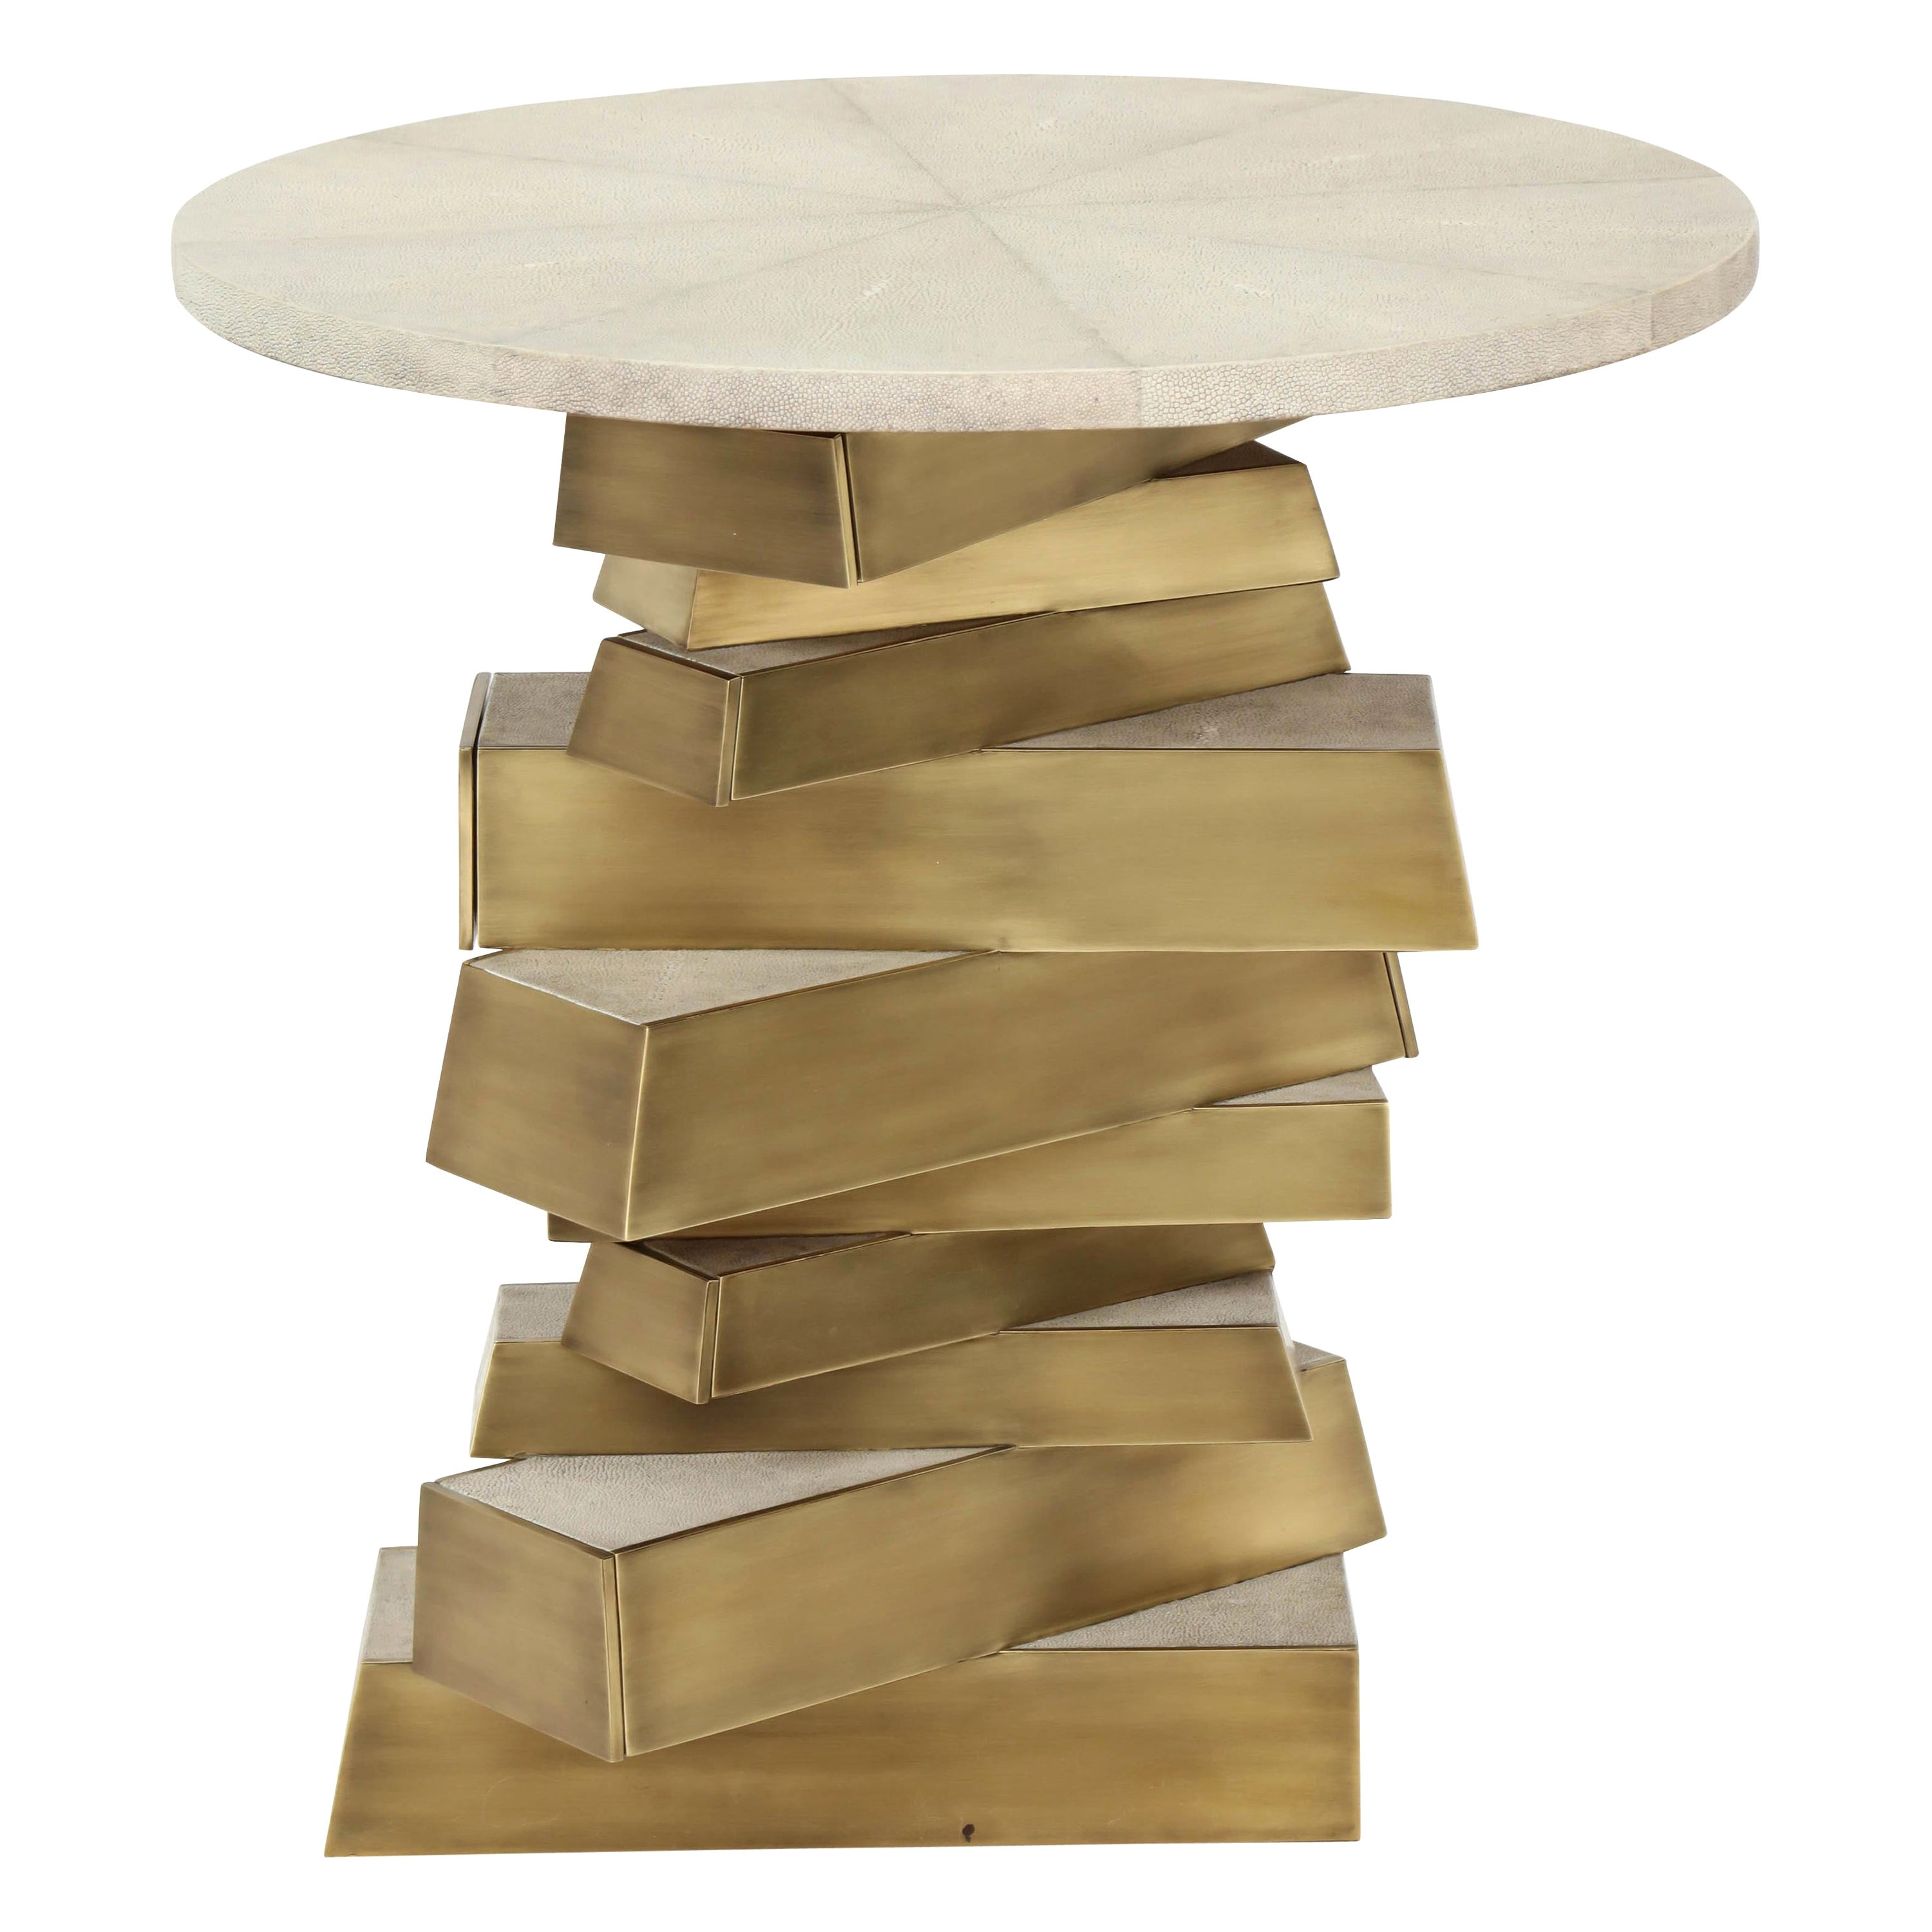 Shagreen and Brass Side Table, Designed with Drawers, Contemporary, Cream Color